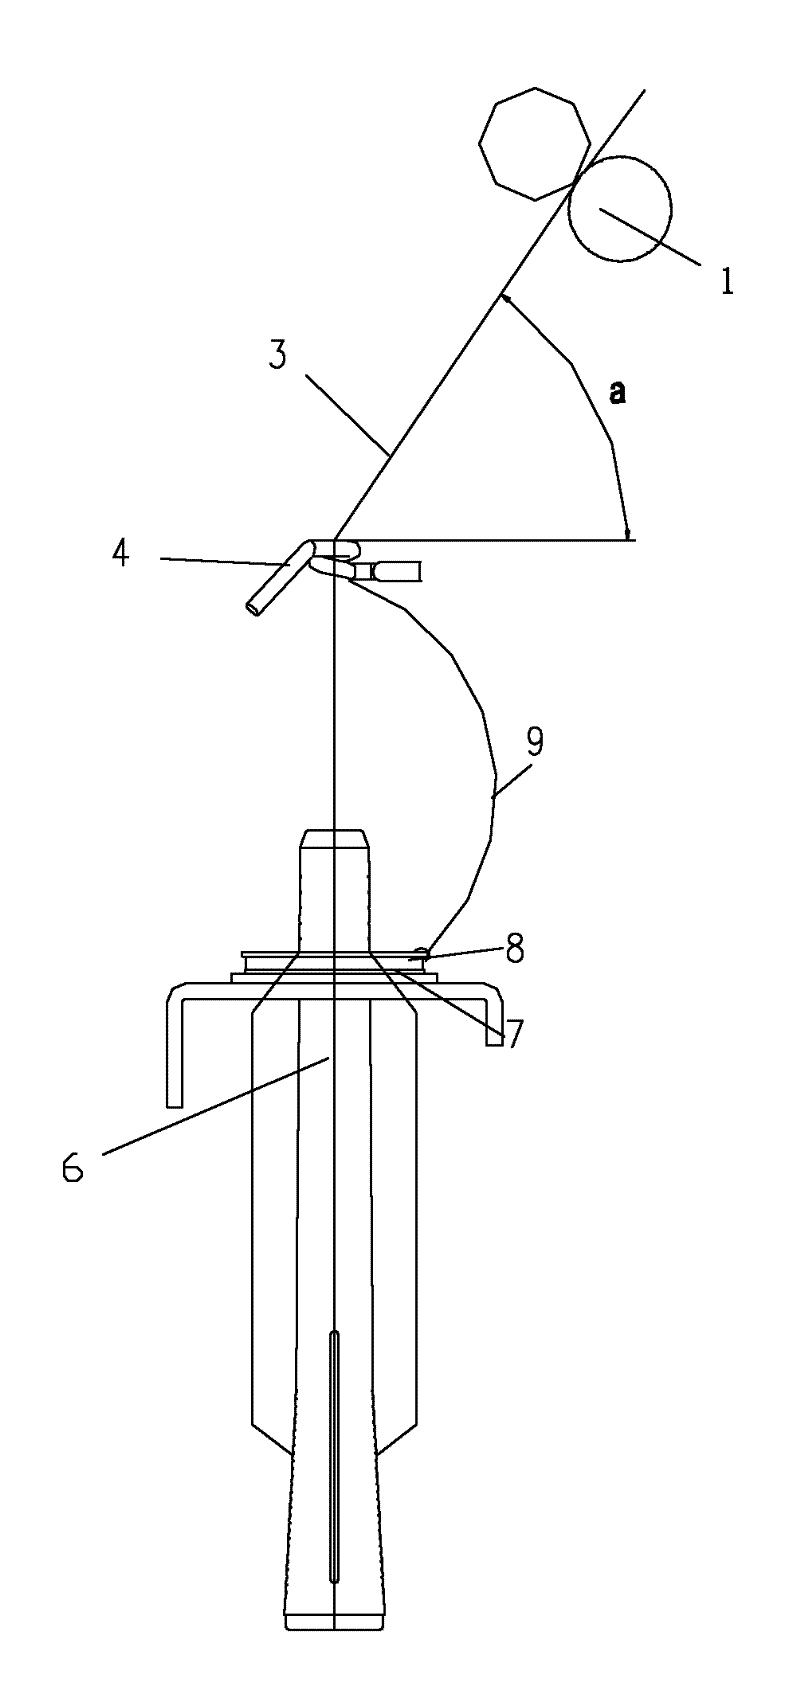 Spinning unit for producing low-twist yarn